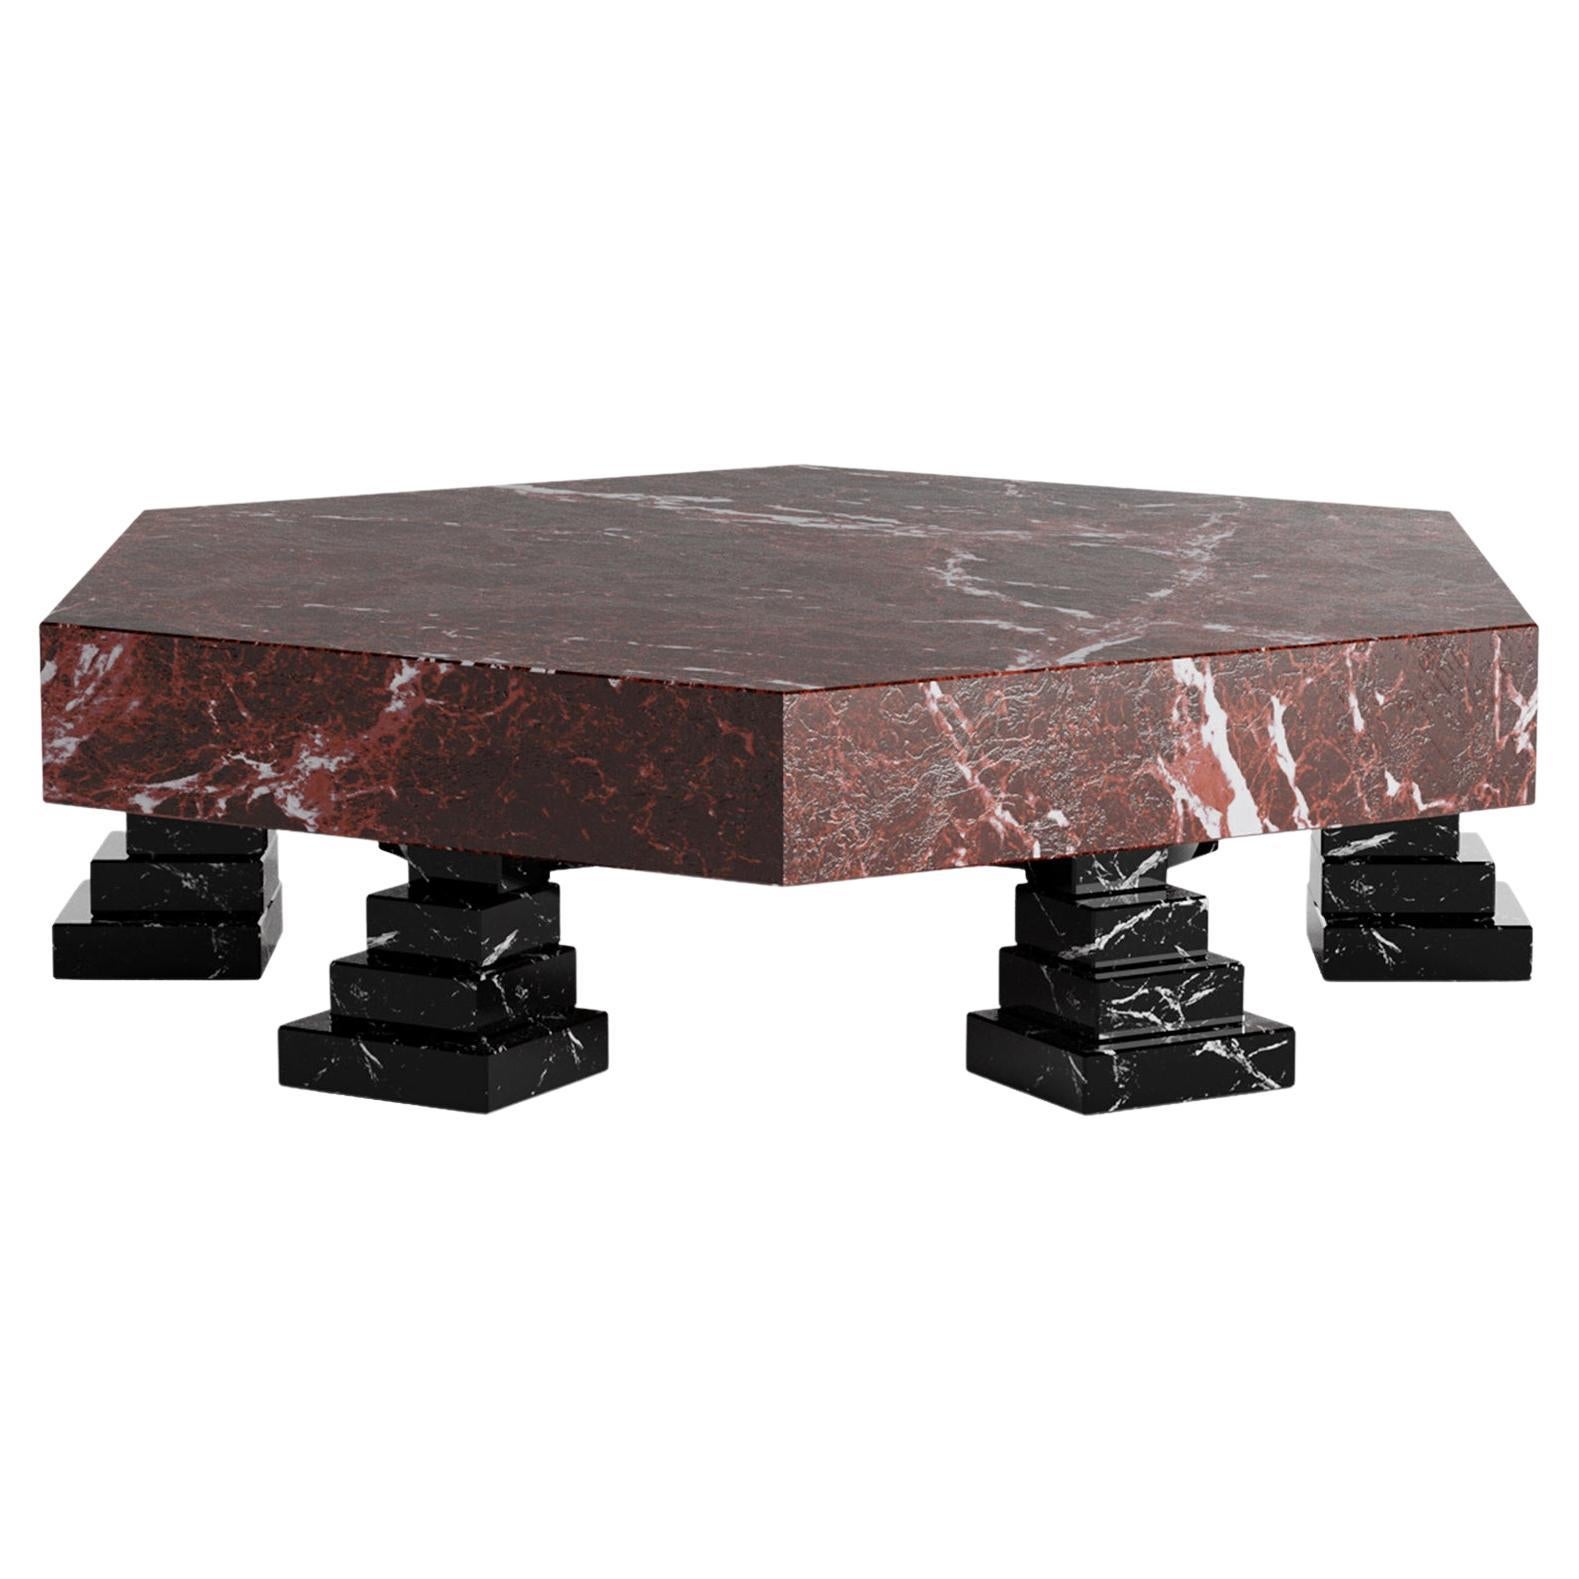 Contemporary Geometric Center Table in Red Levanto Marble & Nero Marquina Marble For Sale